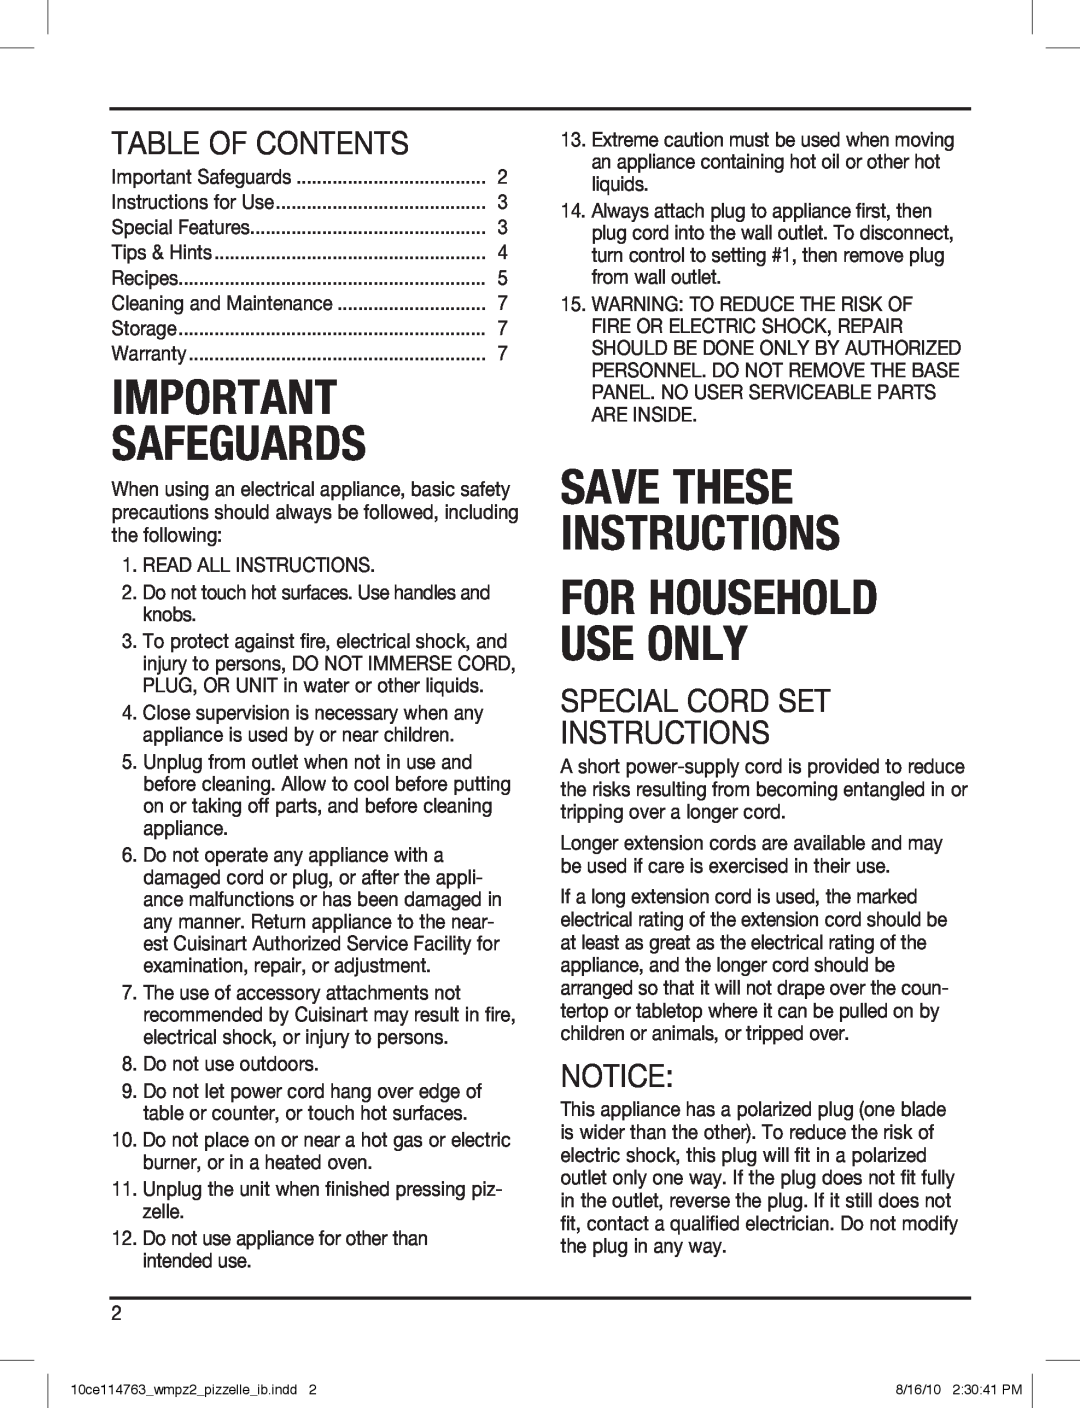 Cuisinart WM-PZ2 manual Table Of Contents, Special Cord Set Instructions, Safeguards, Save These Instructions 